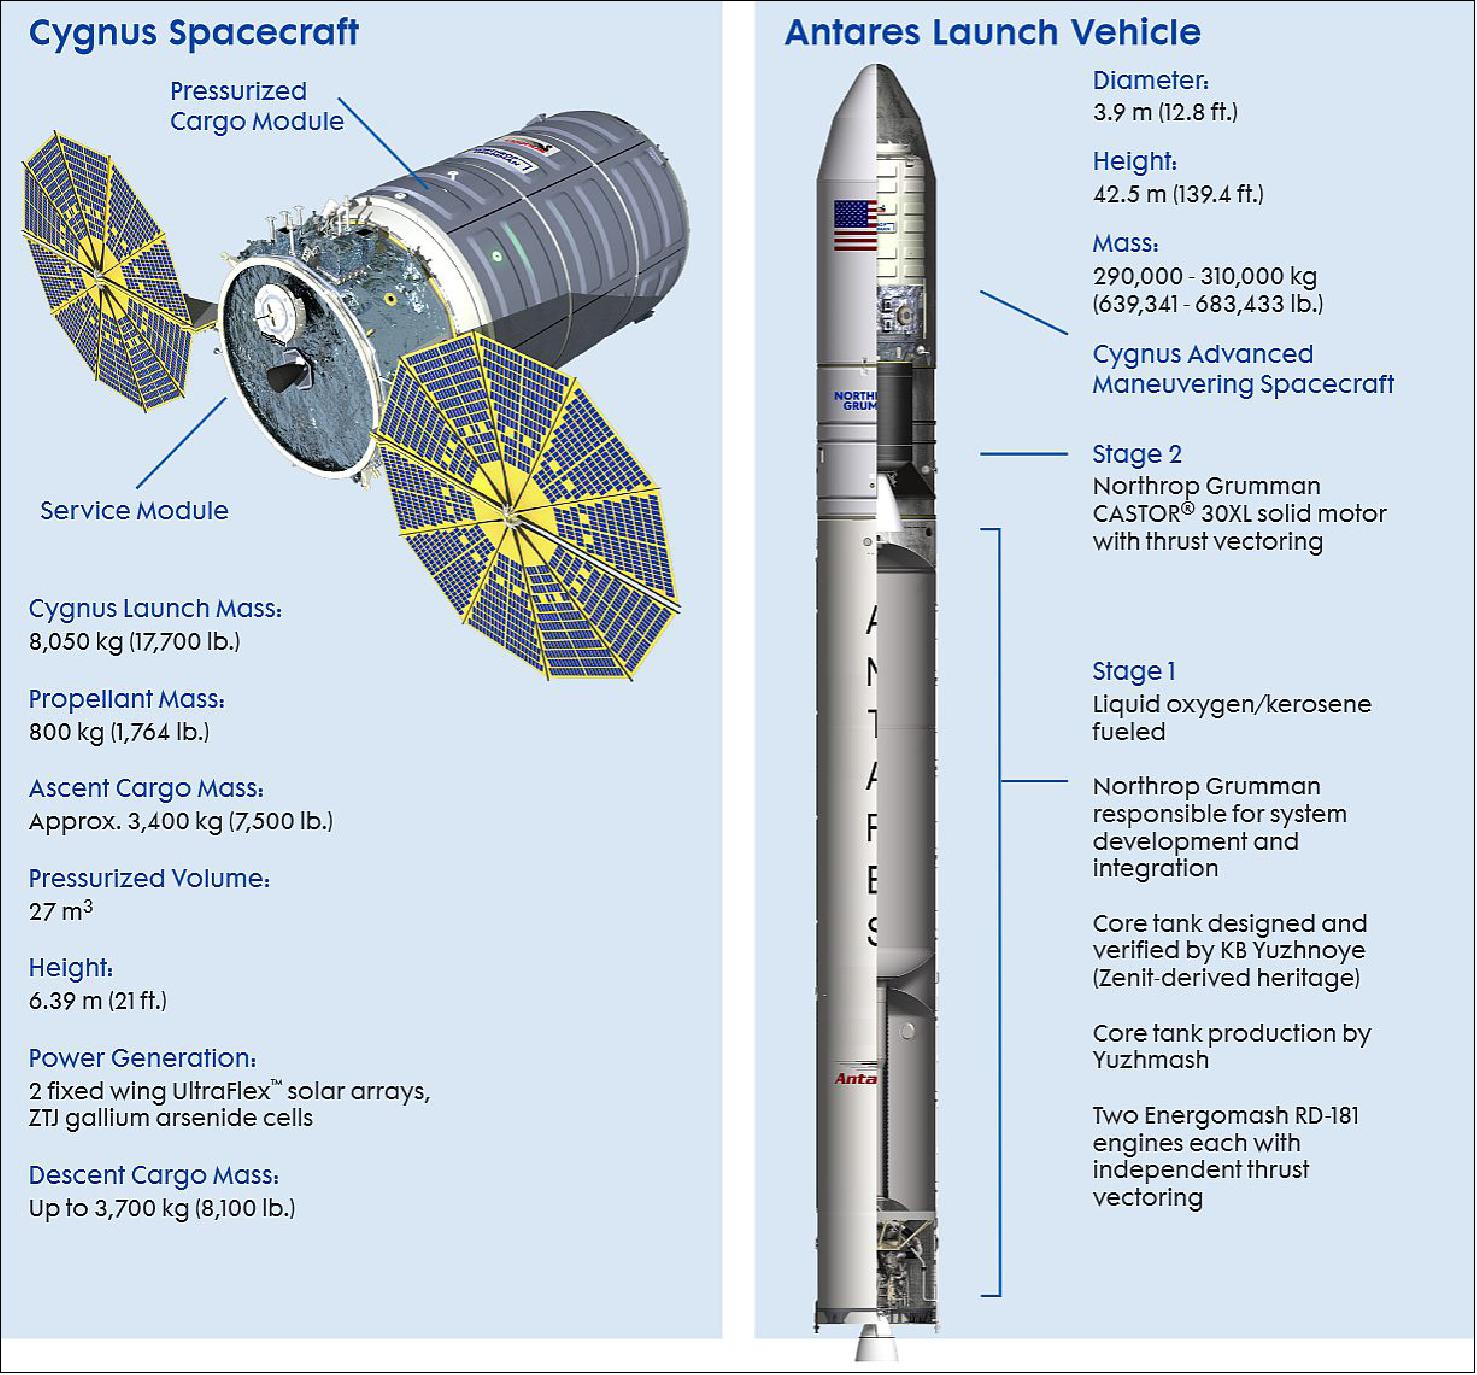 Figure 2: General parameters of the Cygnus spacecraft and of the Antares launch vehicle (image credit: Northrop Grumman)